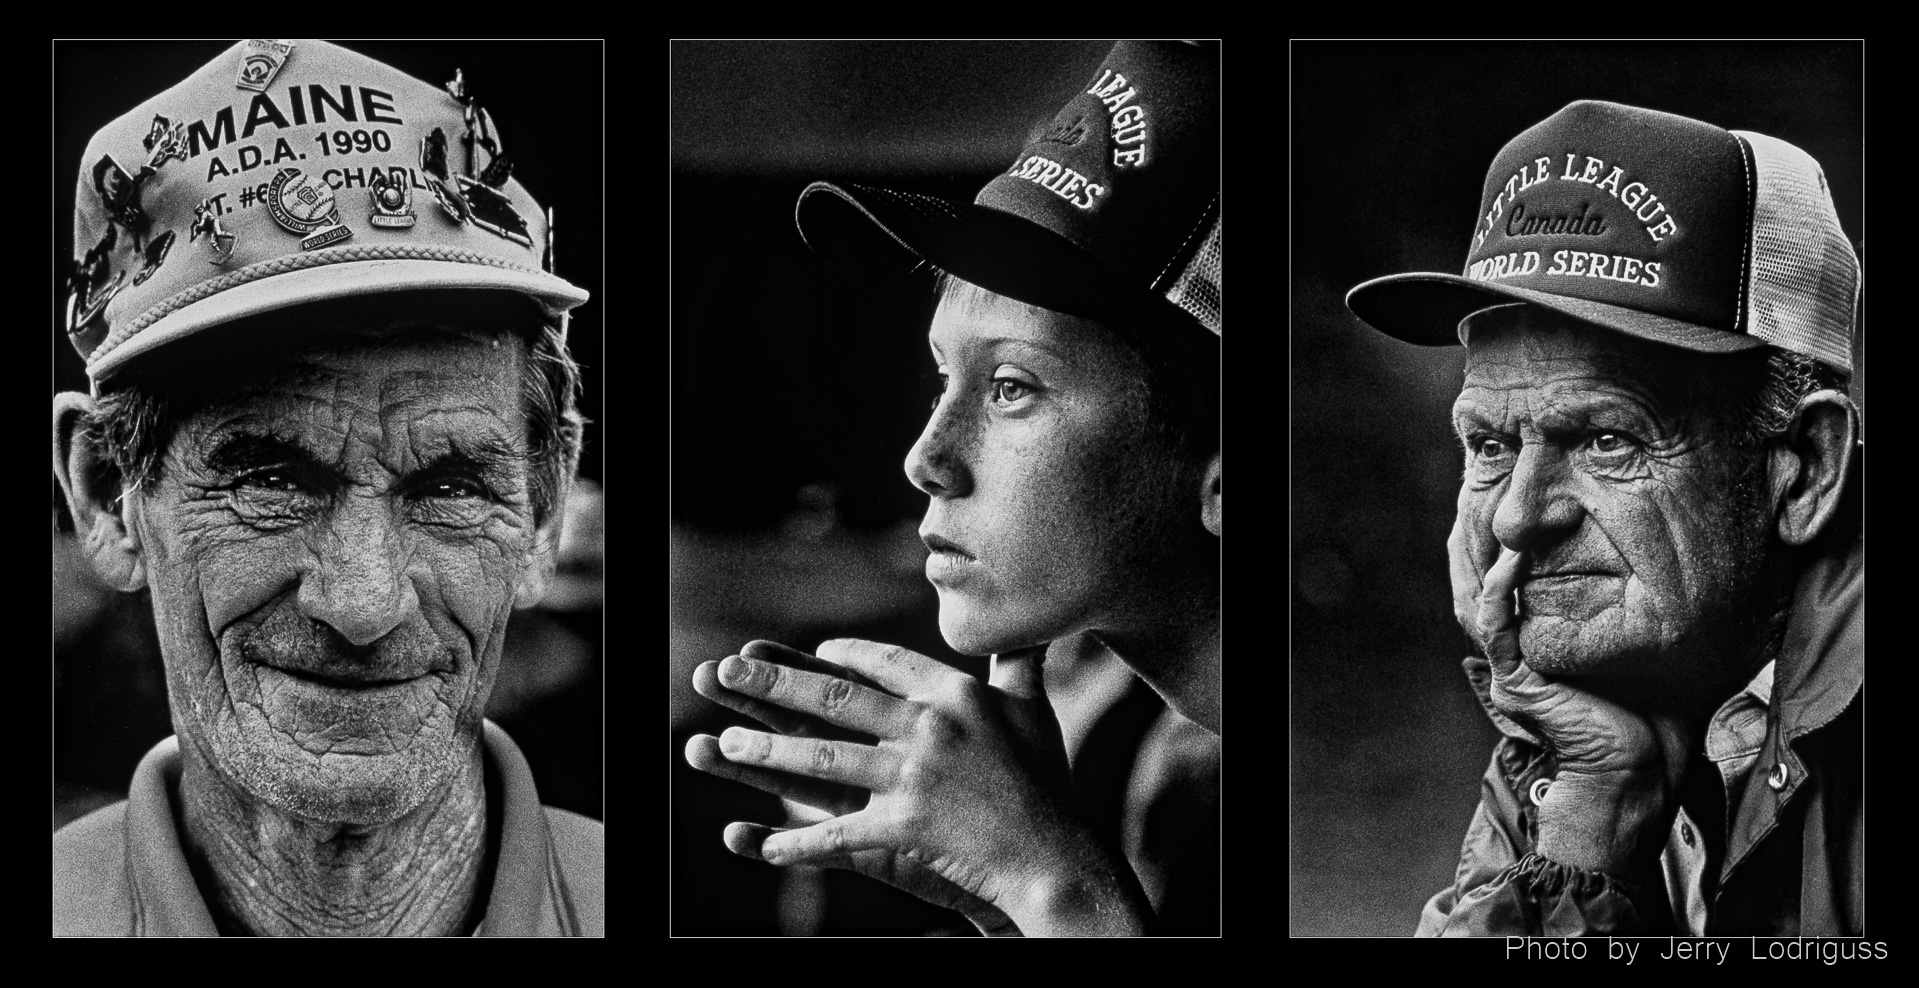 Volunteers, players and coaches all contribute to the sucess of the Little League. Here are, from left, portraits of volunteer Charlie Perry of Portland, Maine, Canadan player Jayson Bay, and Canada coach Andy Nilesky.